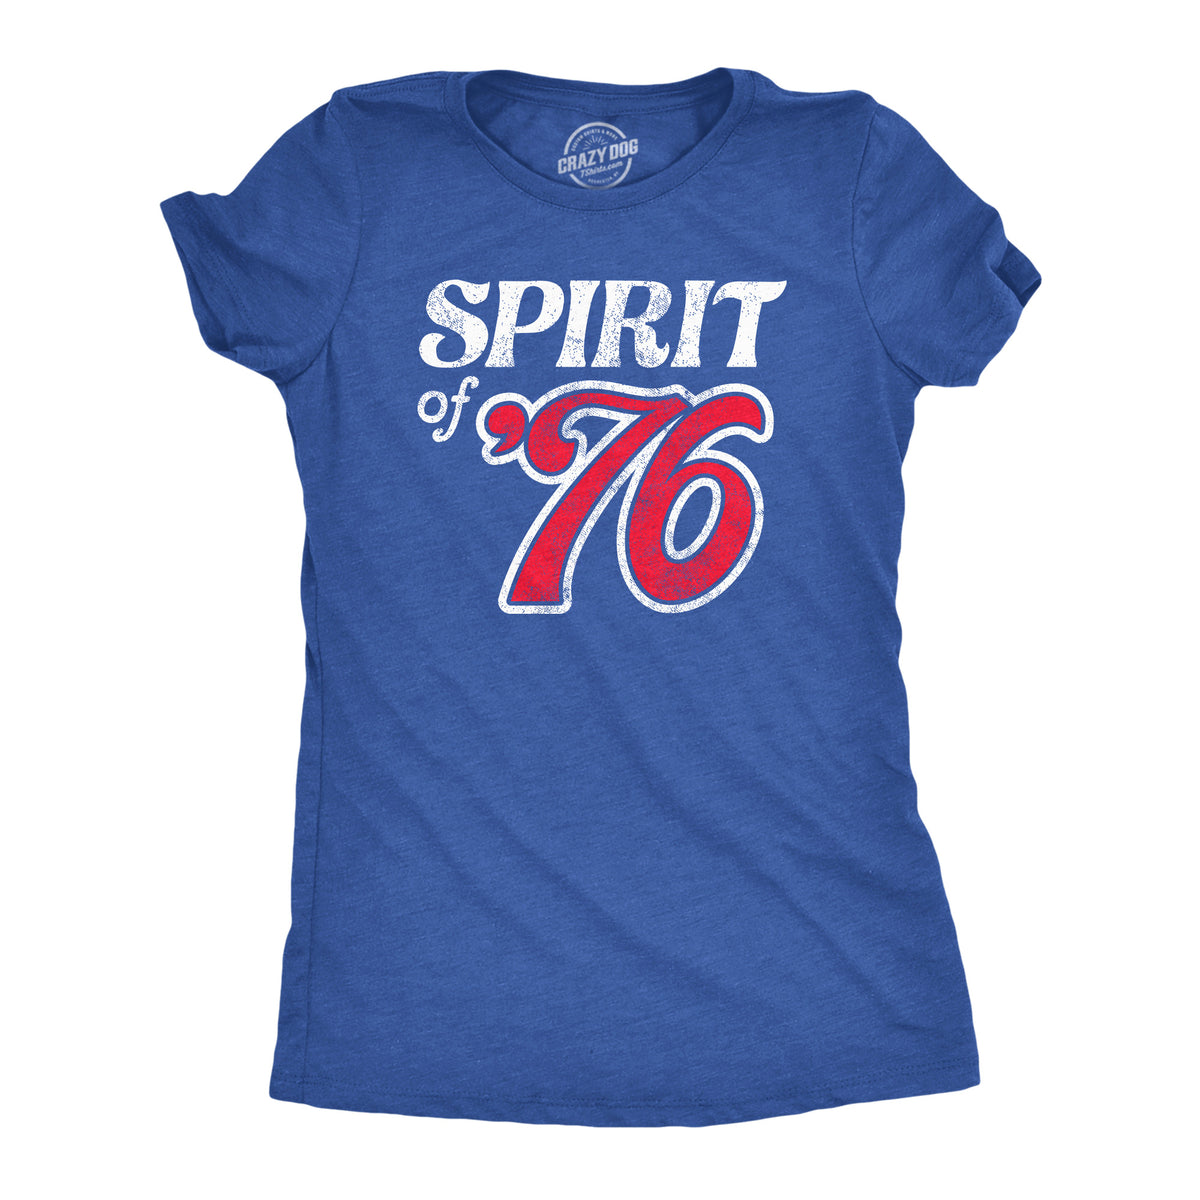 Funny Heather Royal - 76 Spirit Of 76 Womens T Shirt Nerdy Fourth Of July Tee